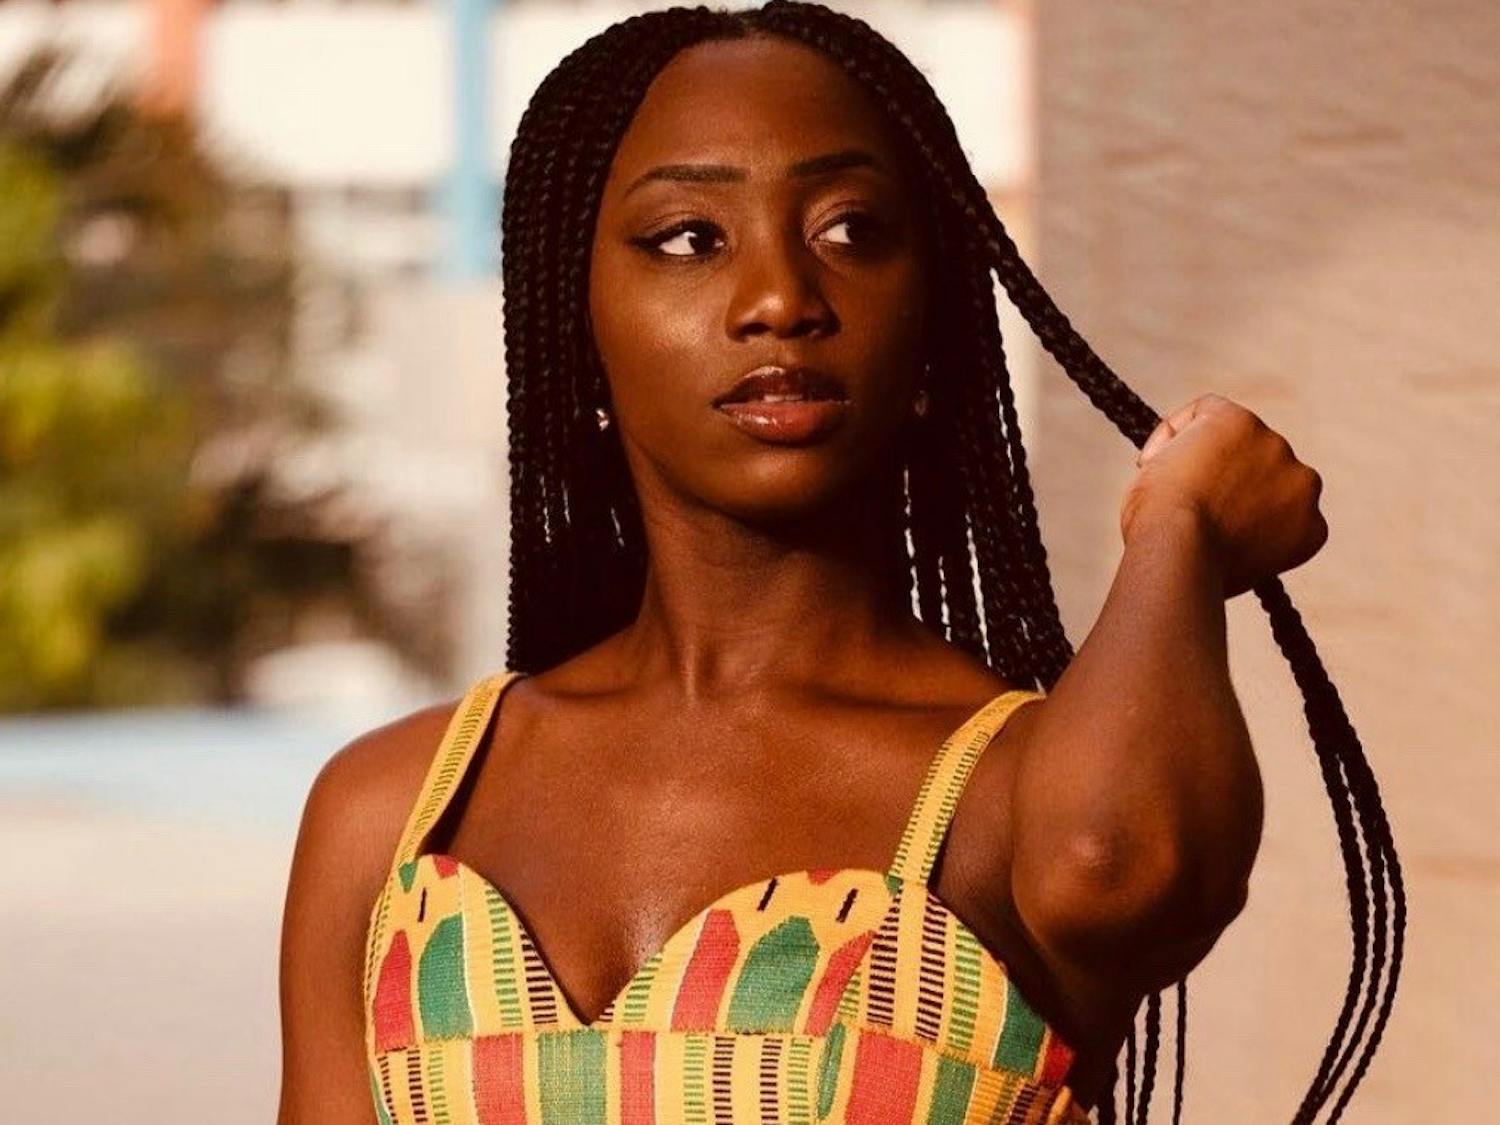 Caitlyn Kumi sells Ghanian waist beads through Miss EmpowerHer, a business Kumi launched in hopes to encourage inclusivity, empowerment, and body positivity for all women. Photo courtesy of Caitlyn Kumi.